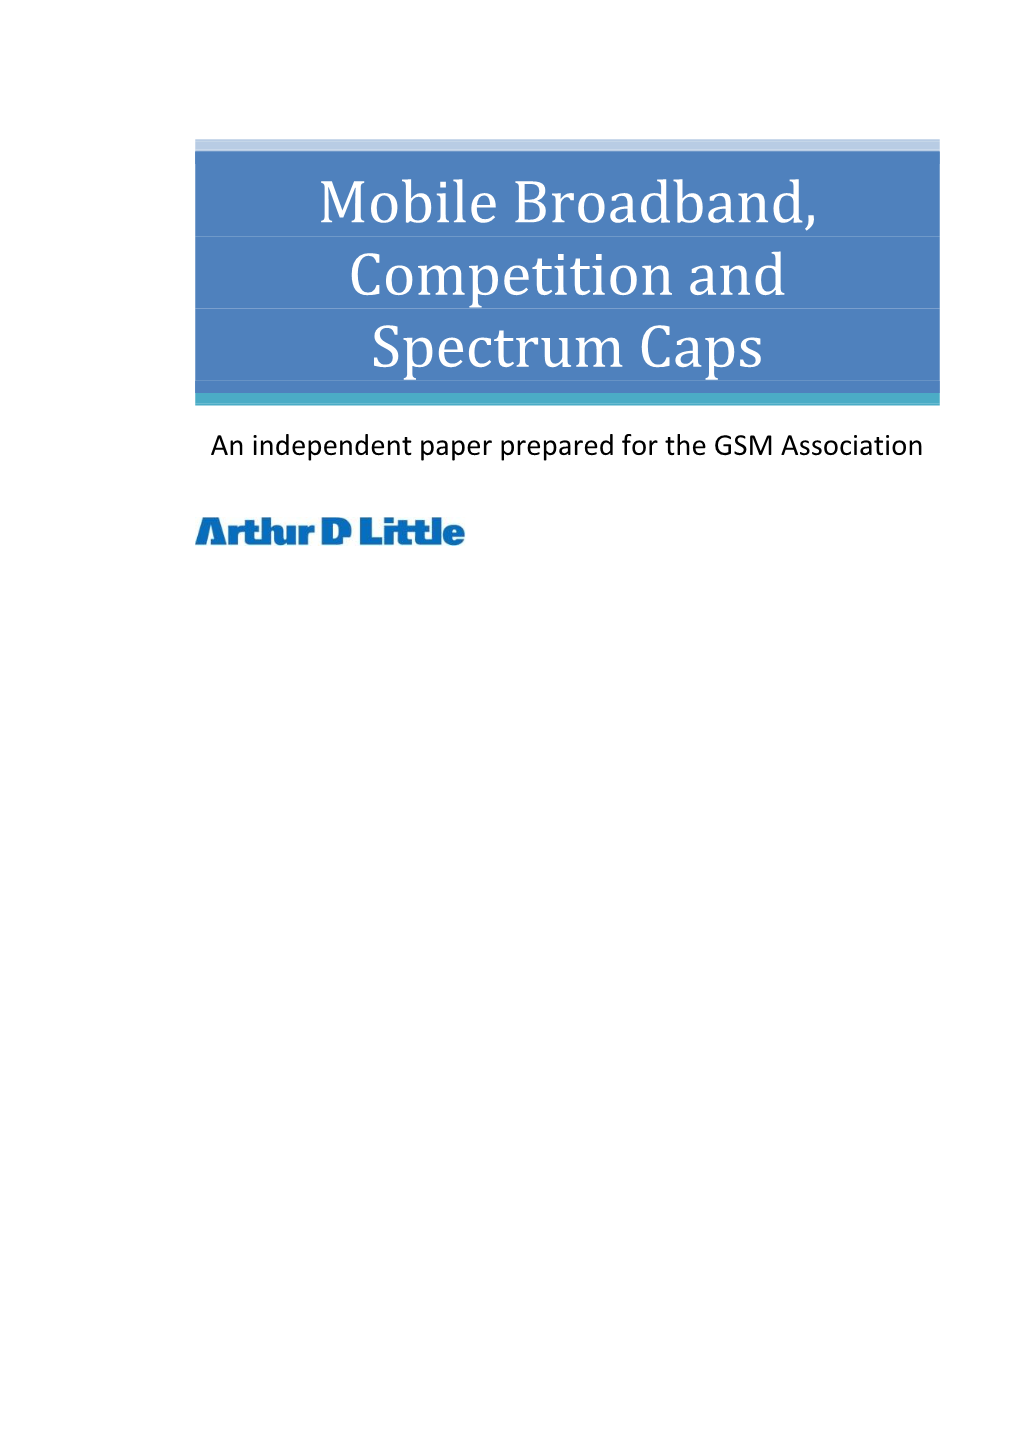 Mobile Broadband, Competition and Spectrum Caps